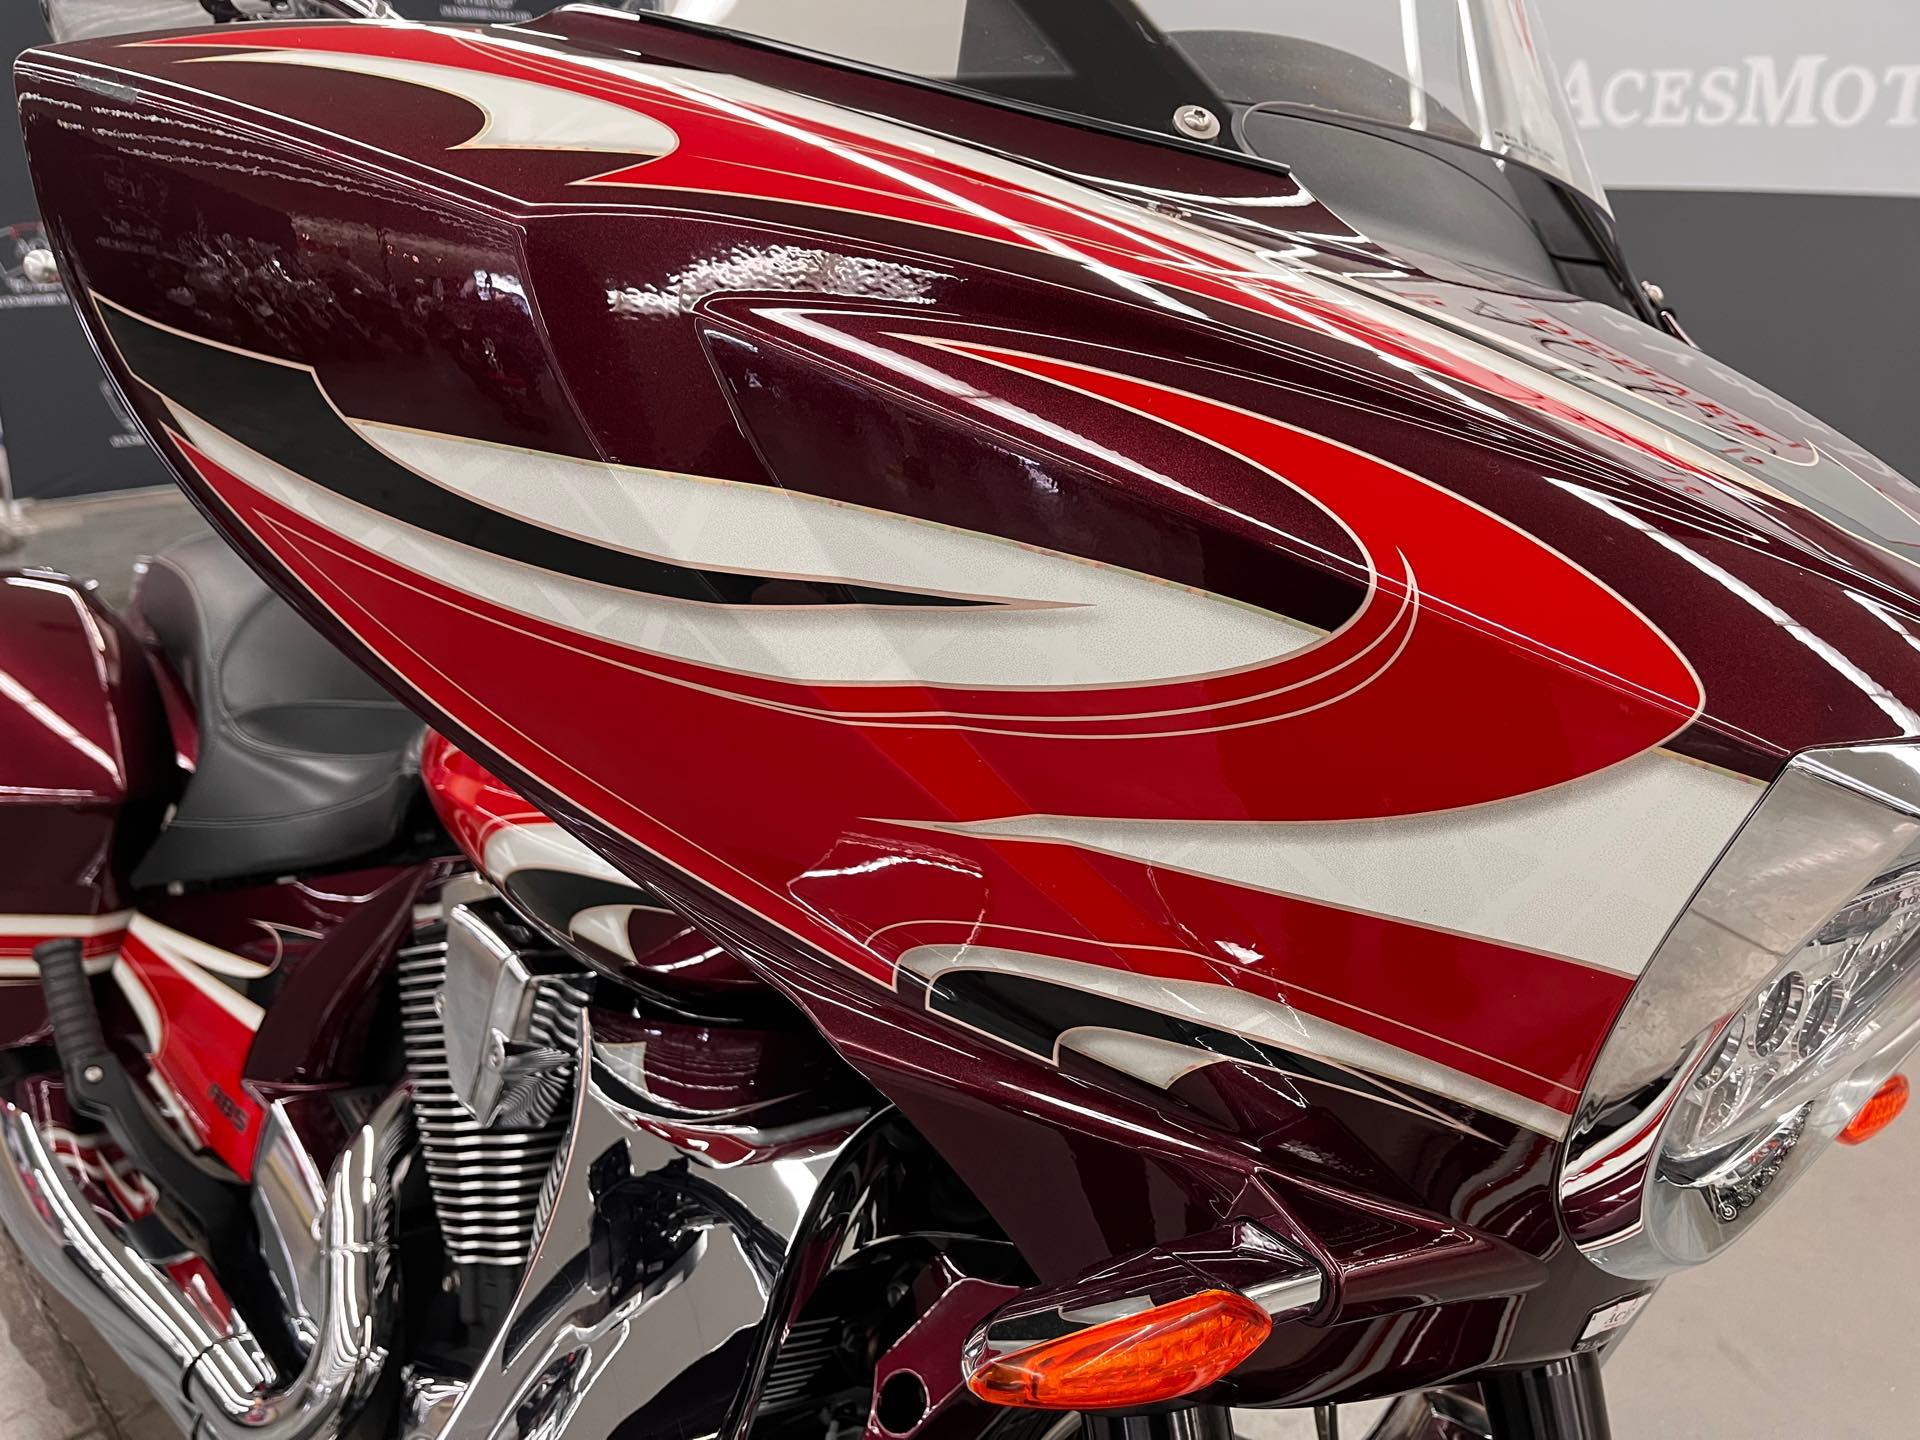 2015 Victory Magnum Ness at Aces Motorcycles - Denver